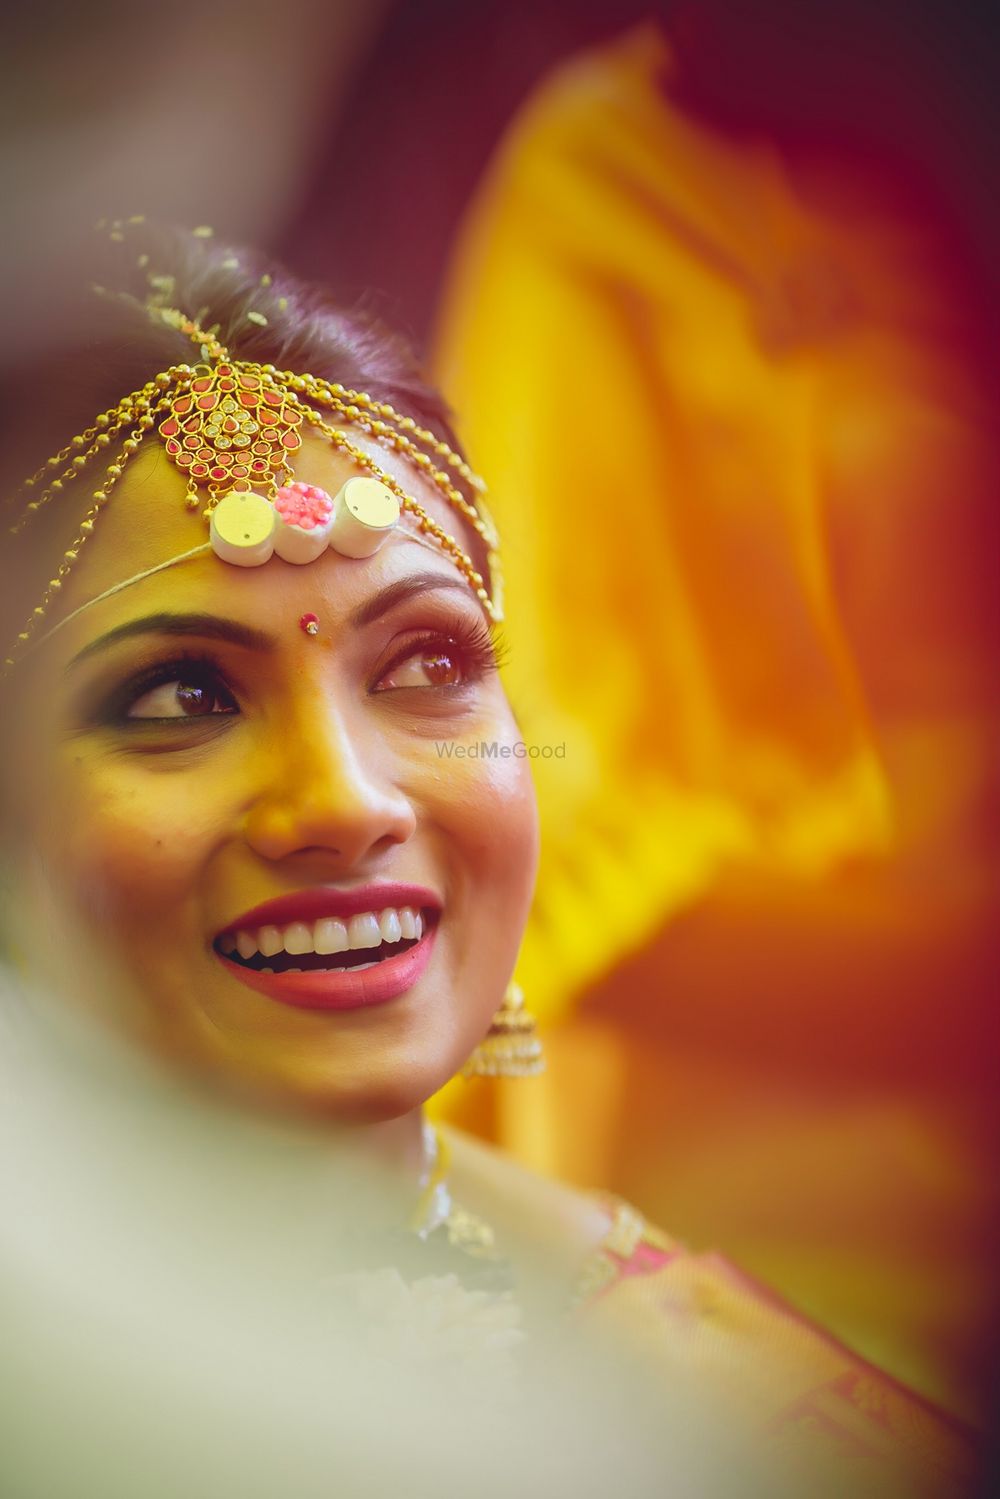 Photo From Deepika + Sumanth - By Manan Photography